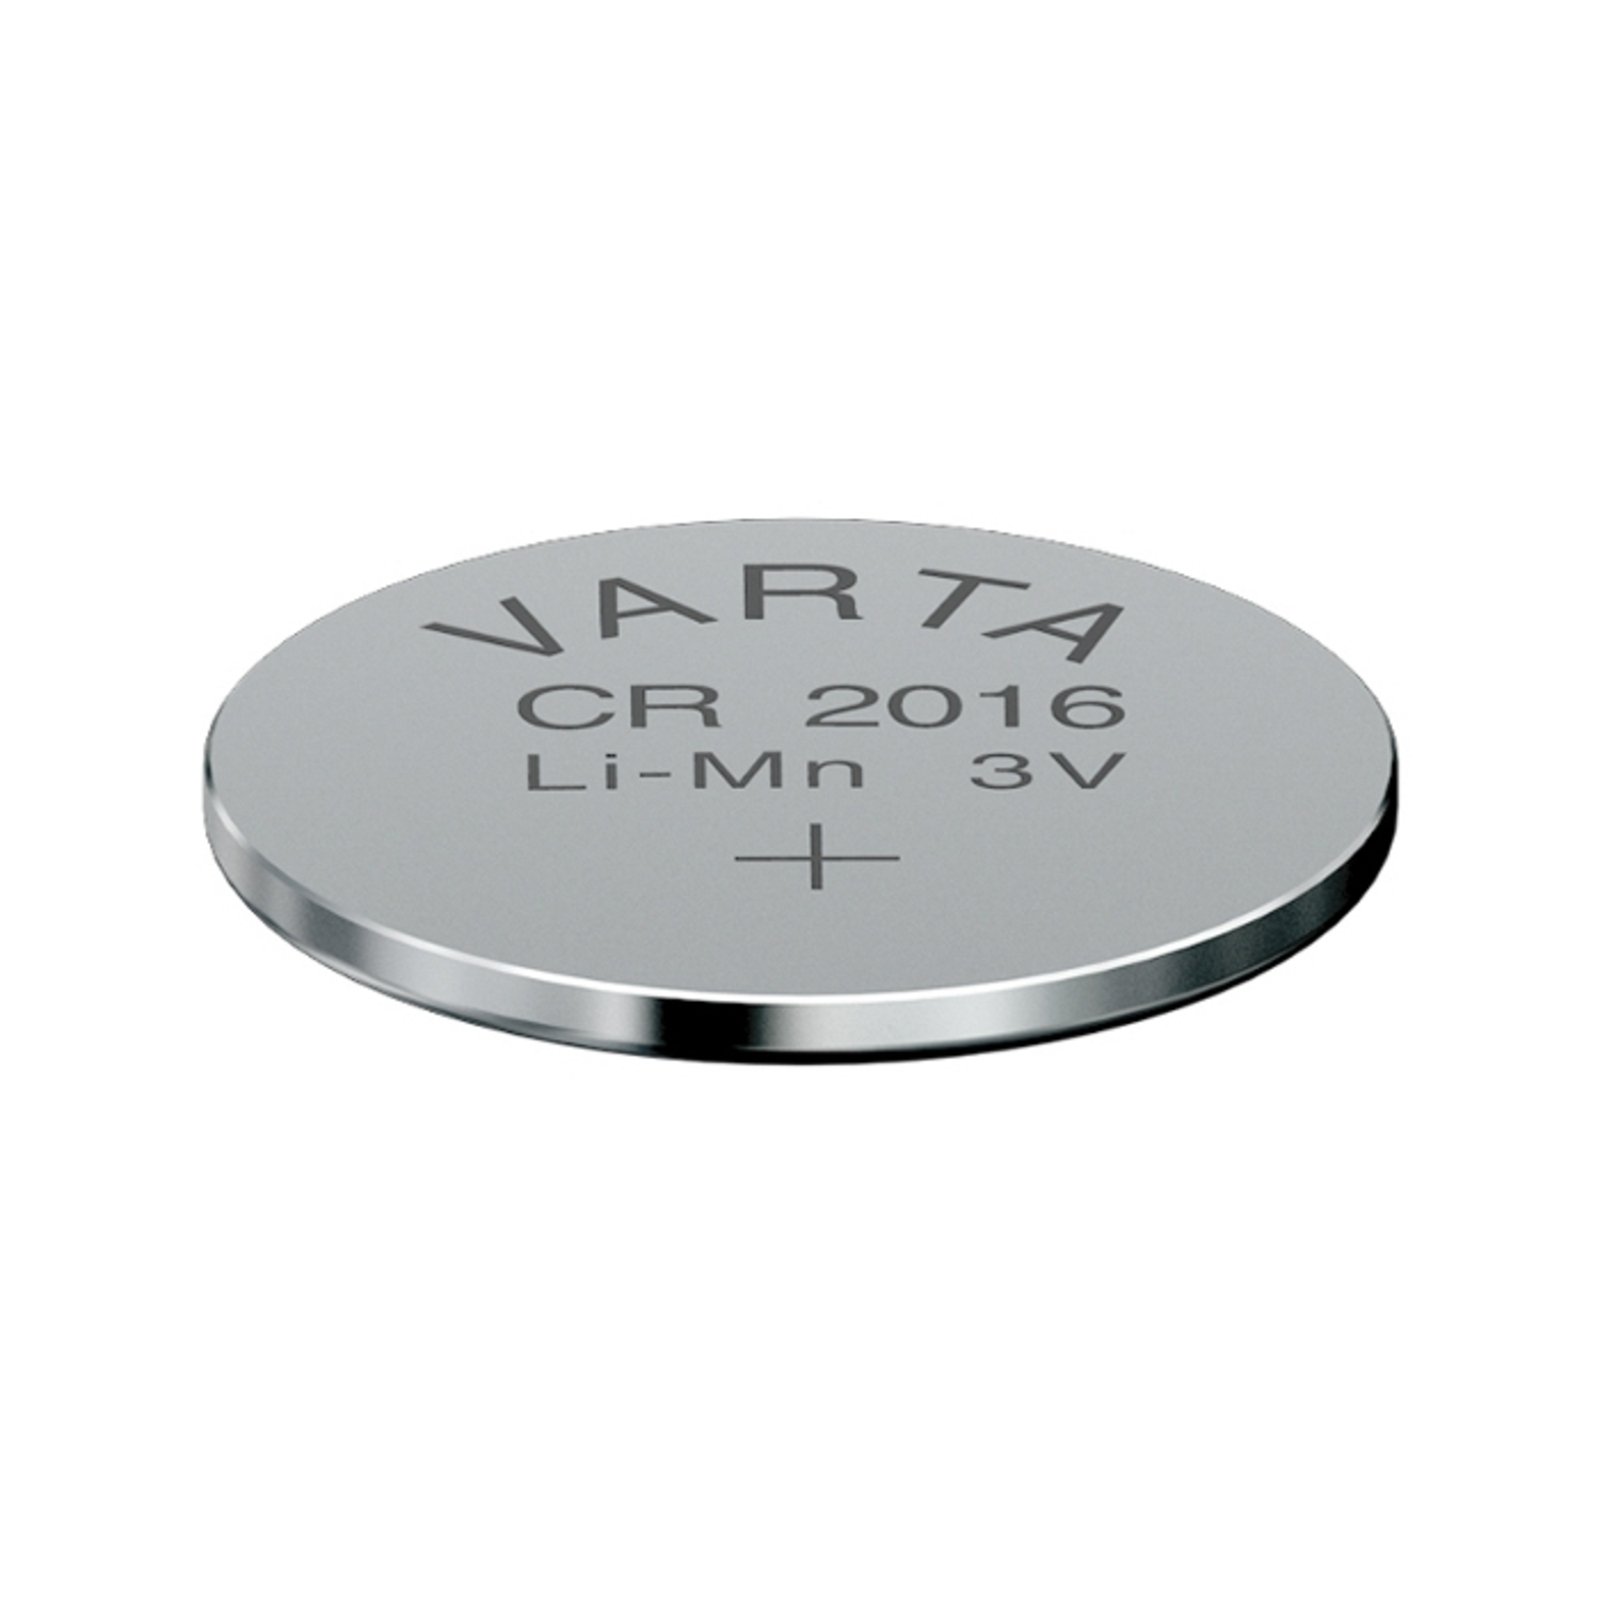 CR2016 3 V lithium button cell from VARTA